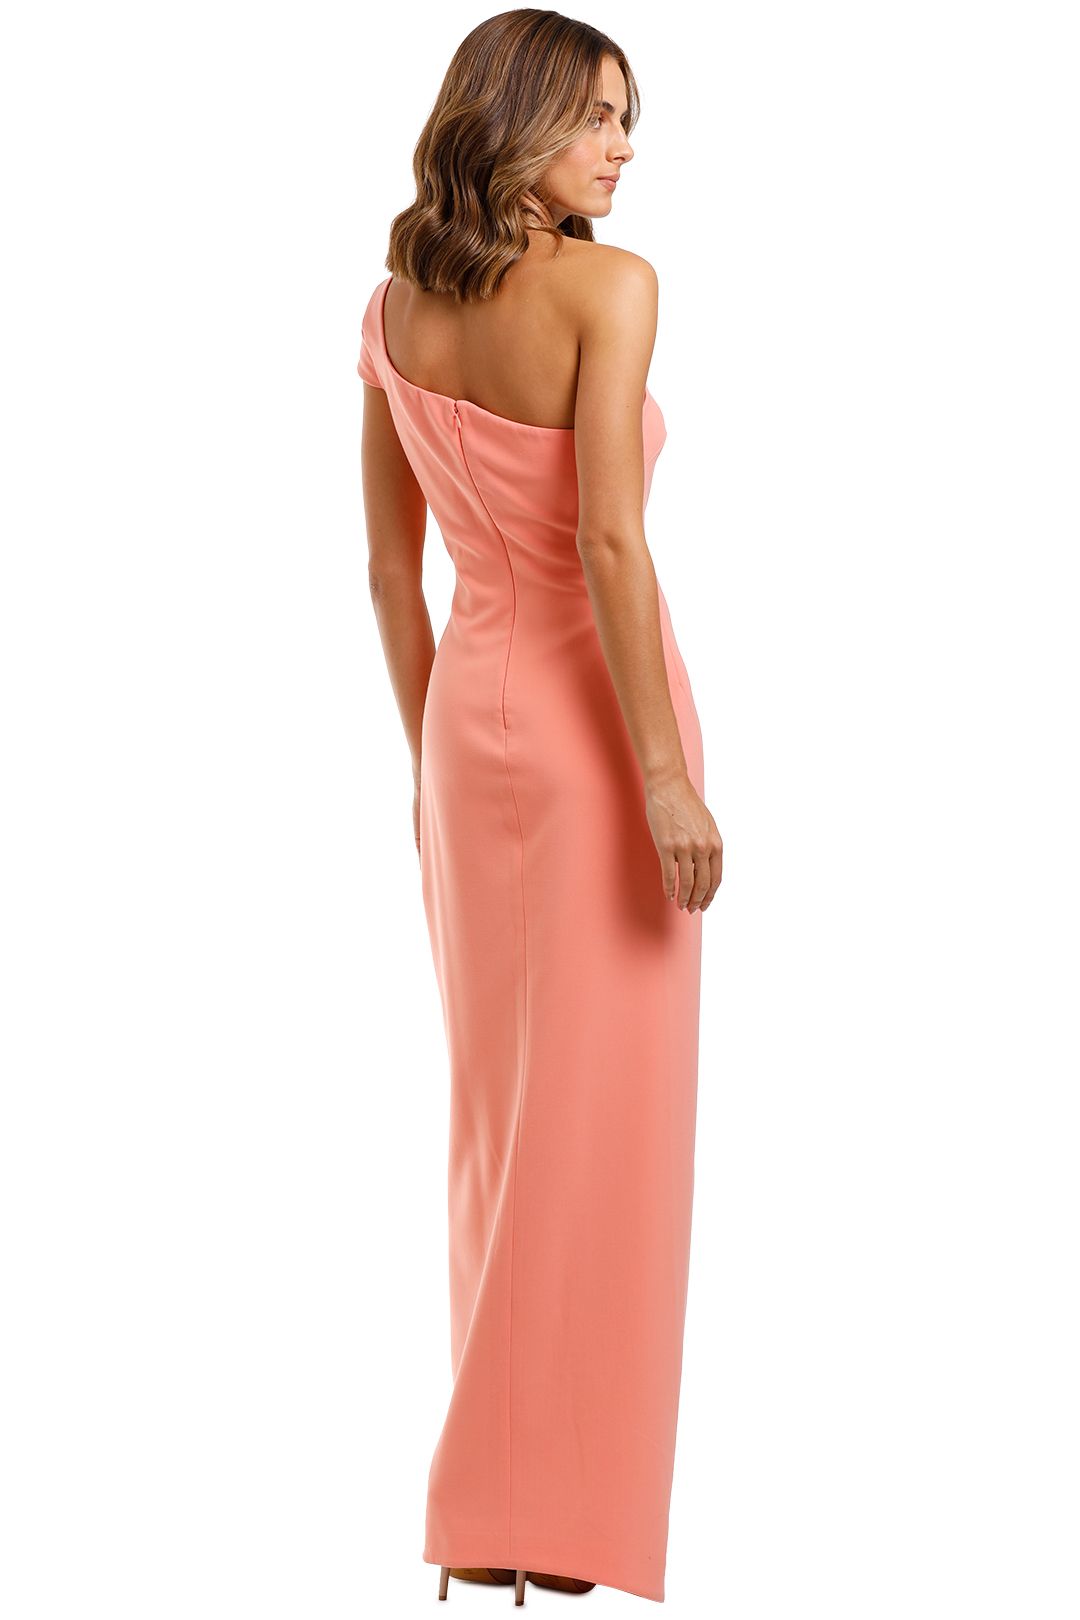 Likely NYC Maxson Gown Apricot Bodycon